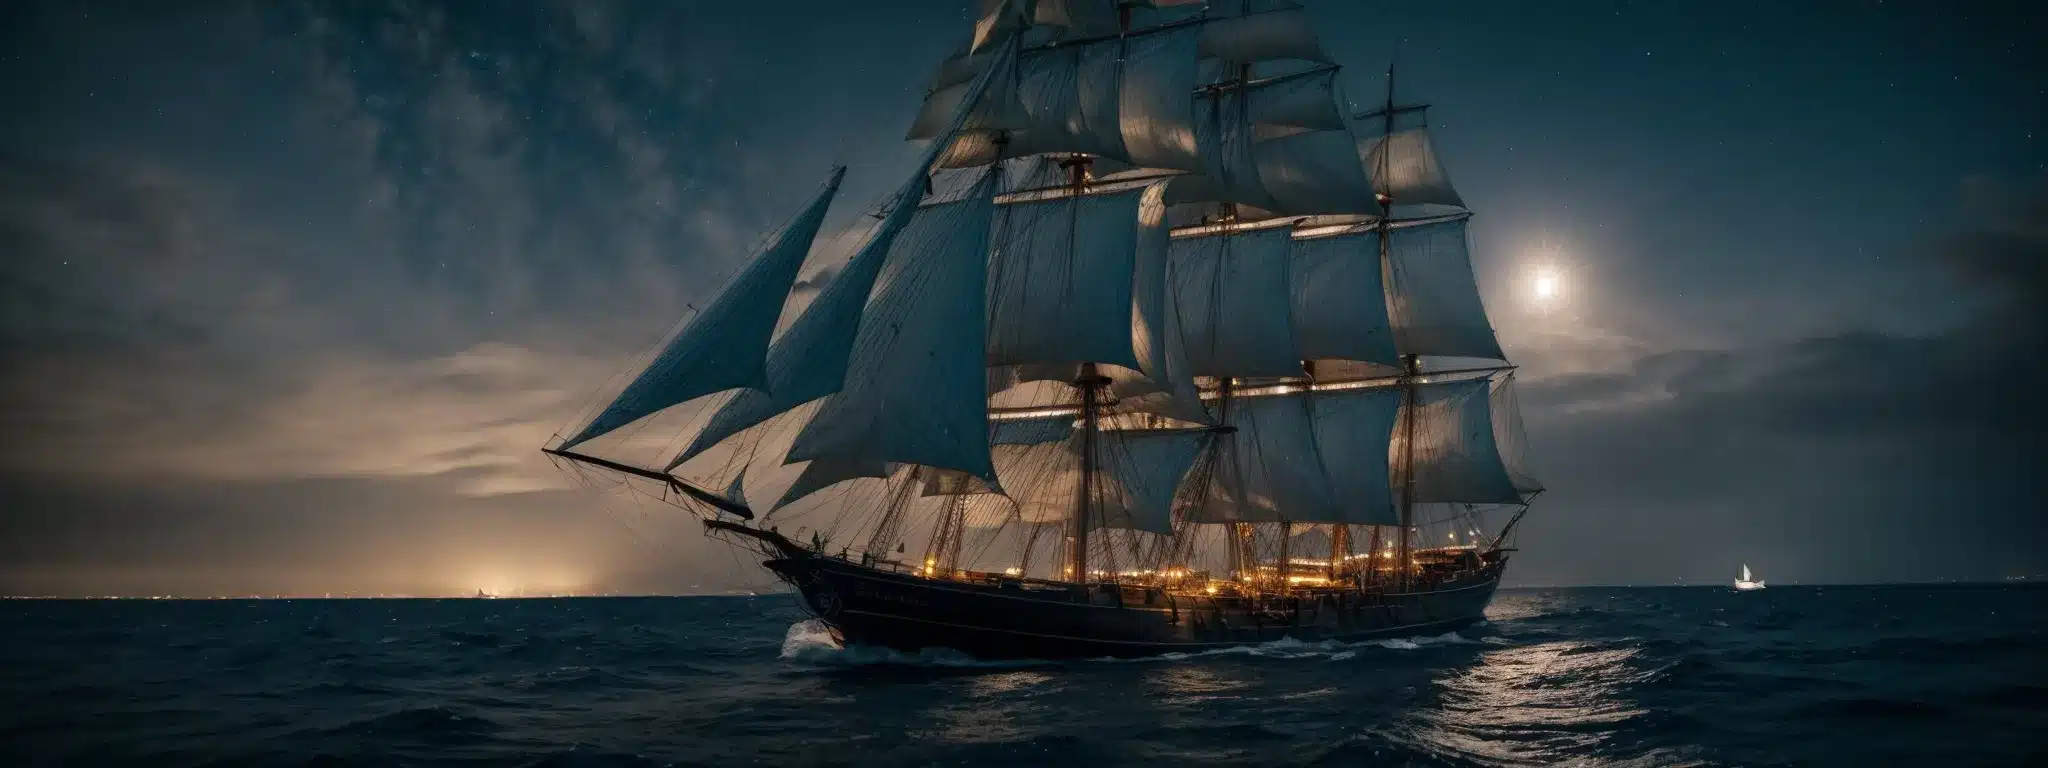 A Tall Sailing Ship With Billowing Sails Glides Through A Starlit Sea, Charting A Course By Celestial Navigation.